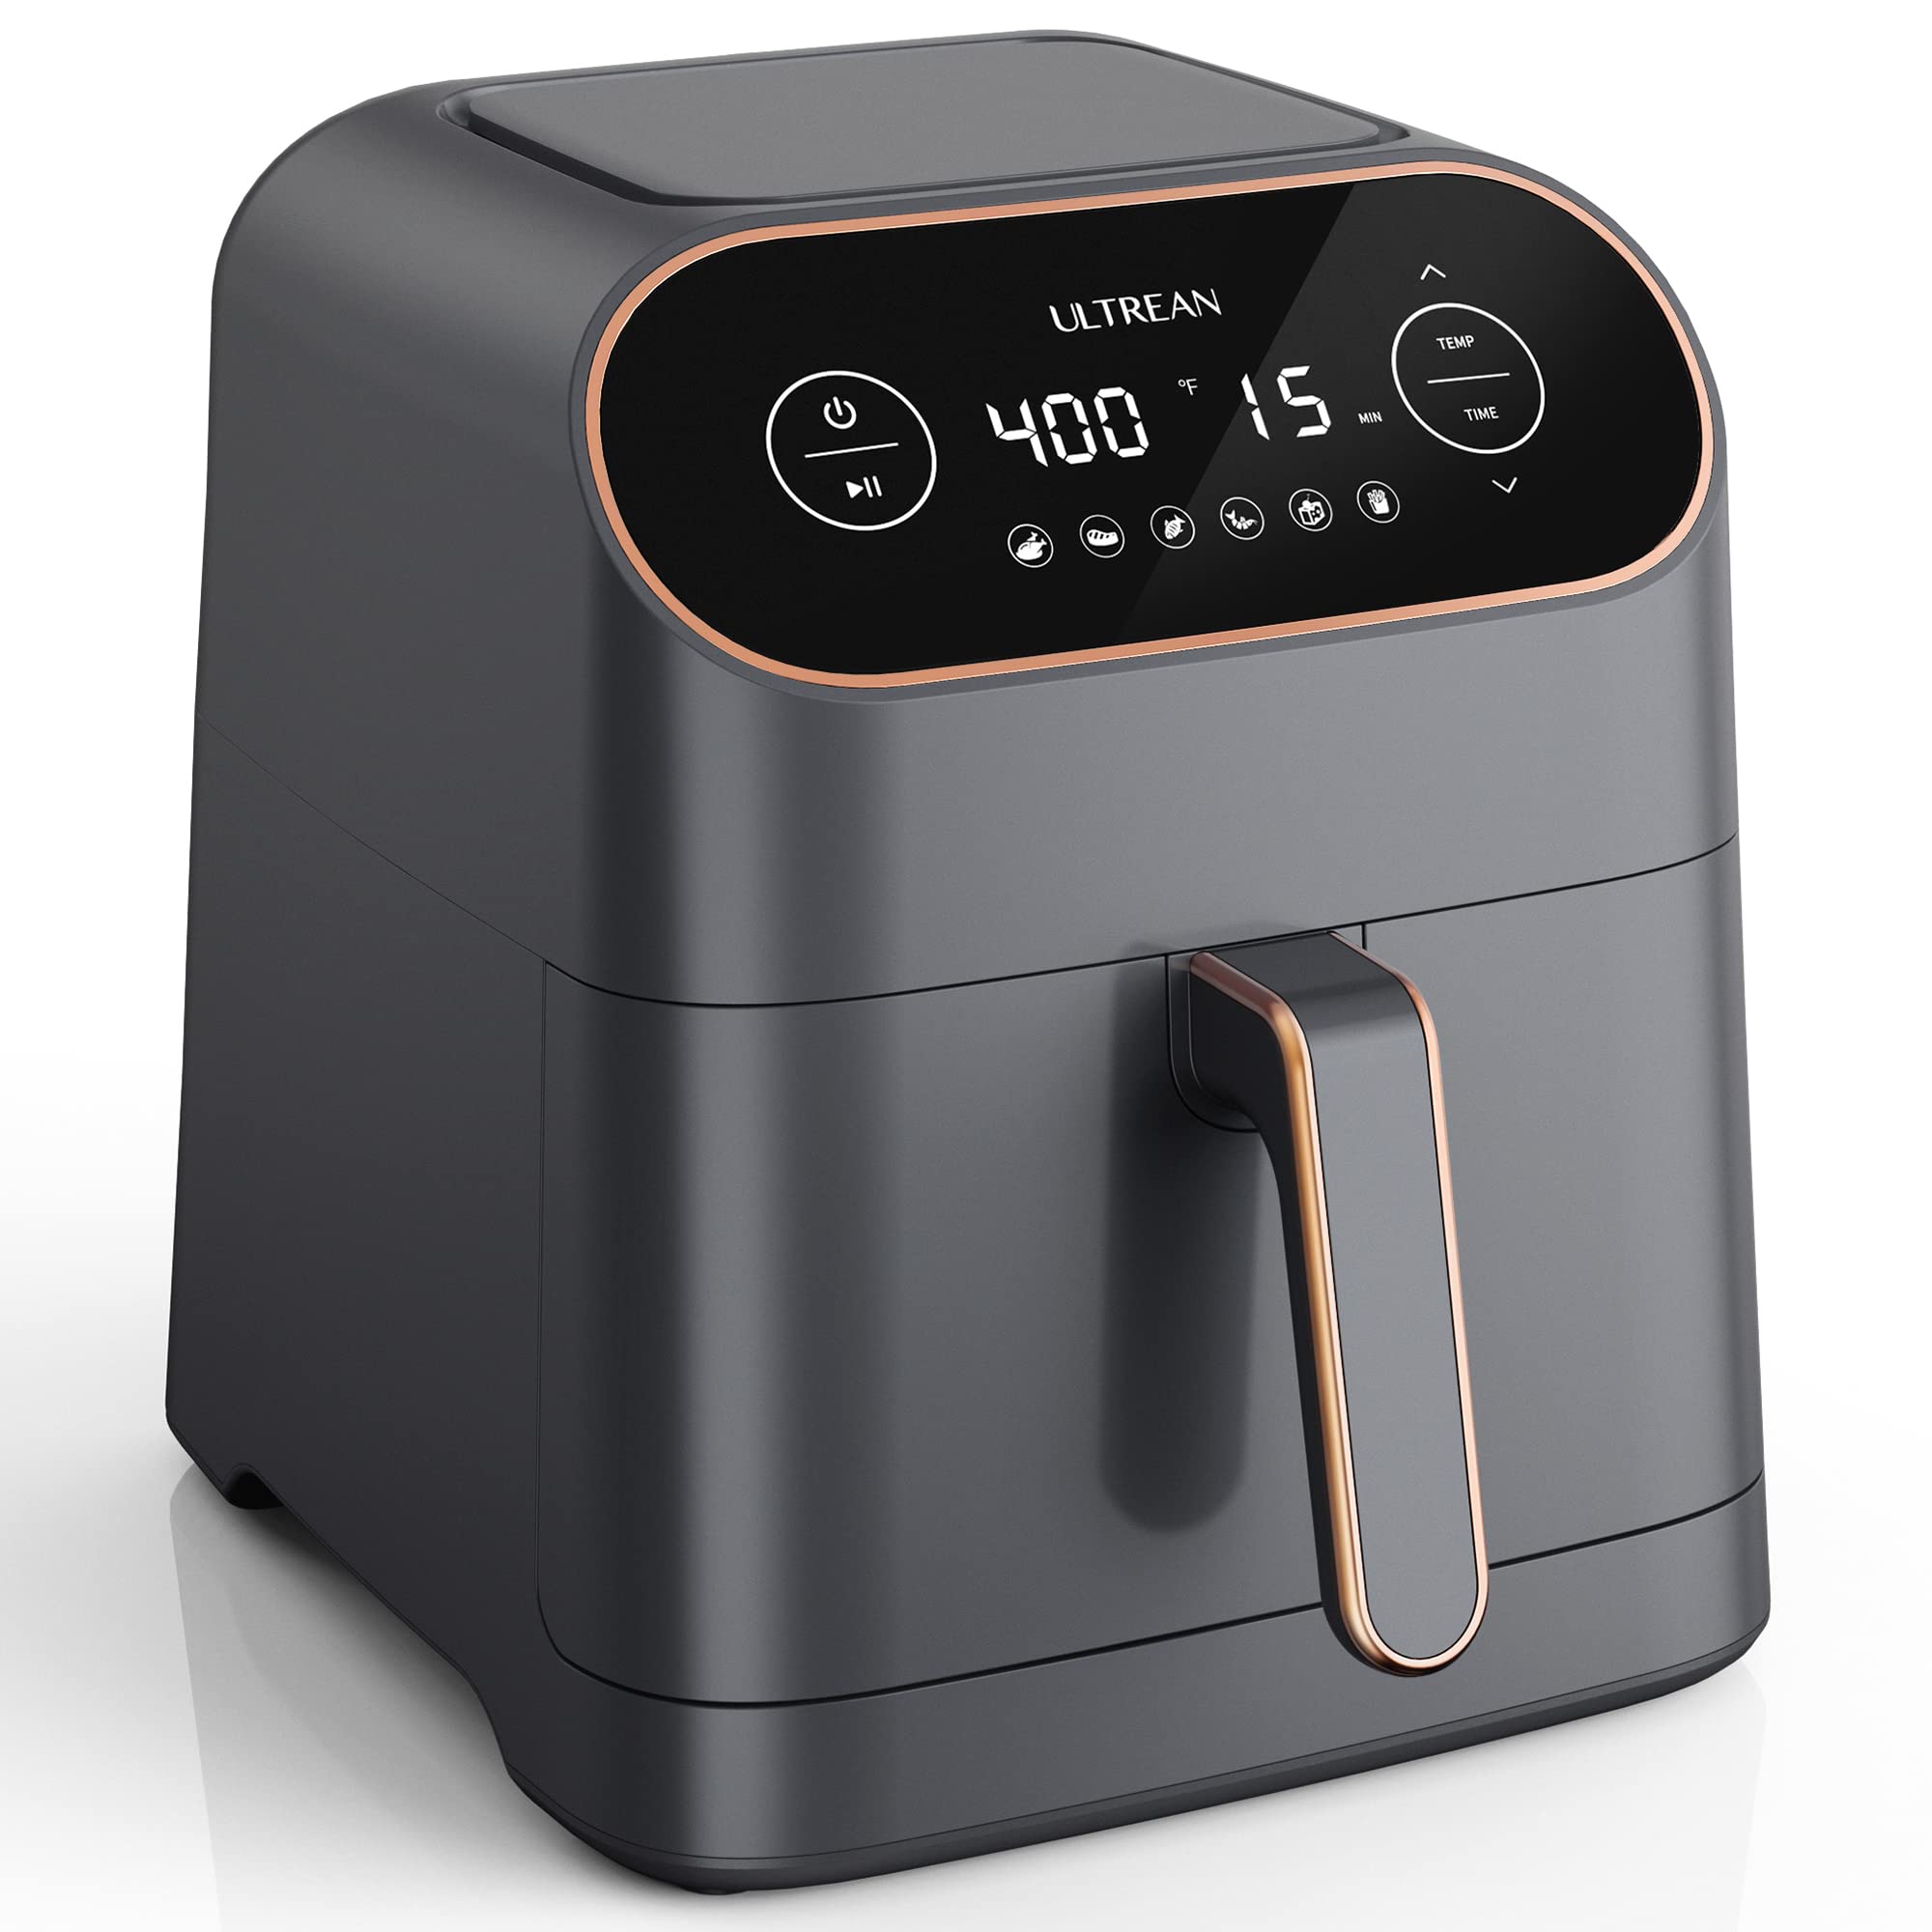 The Ultrean air fryer is on sale at